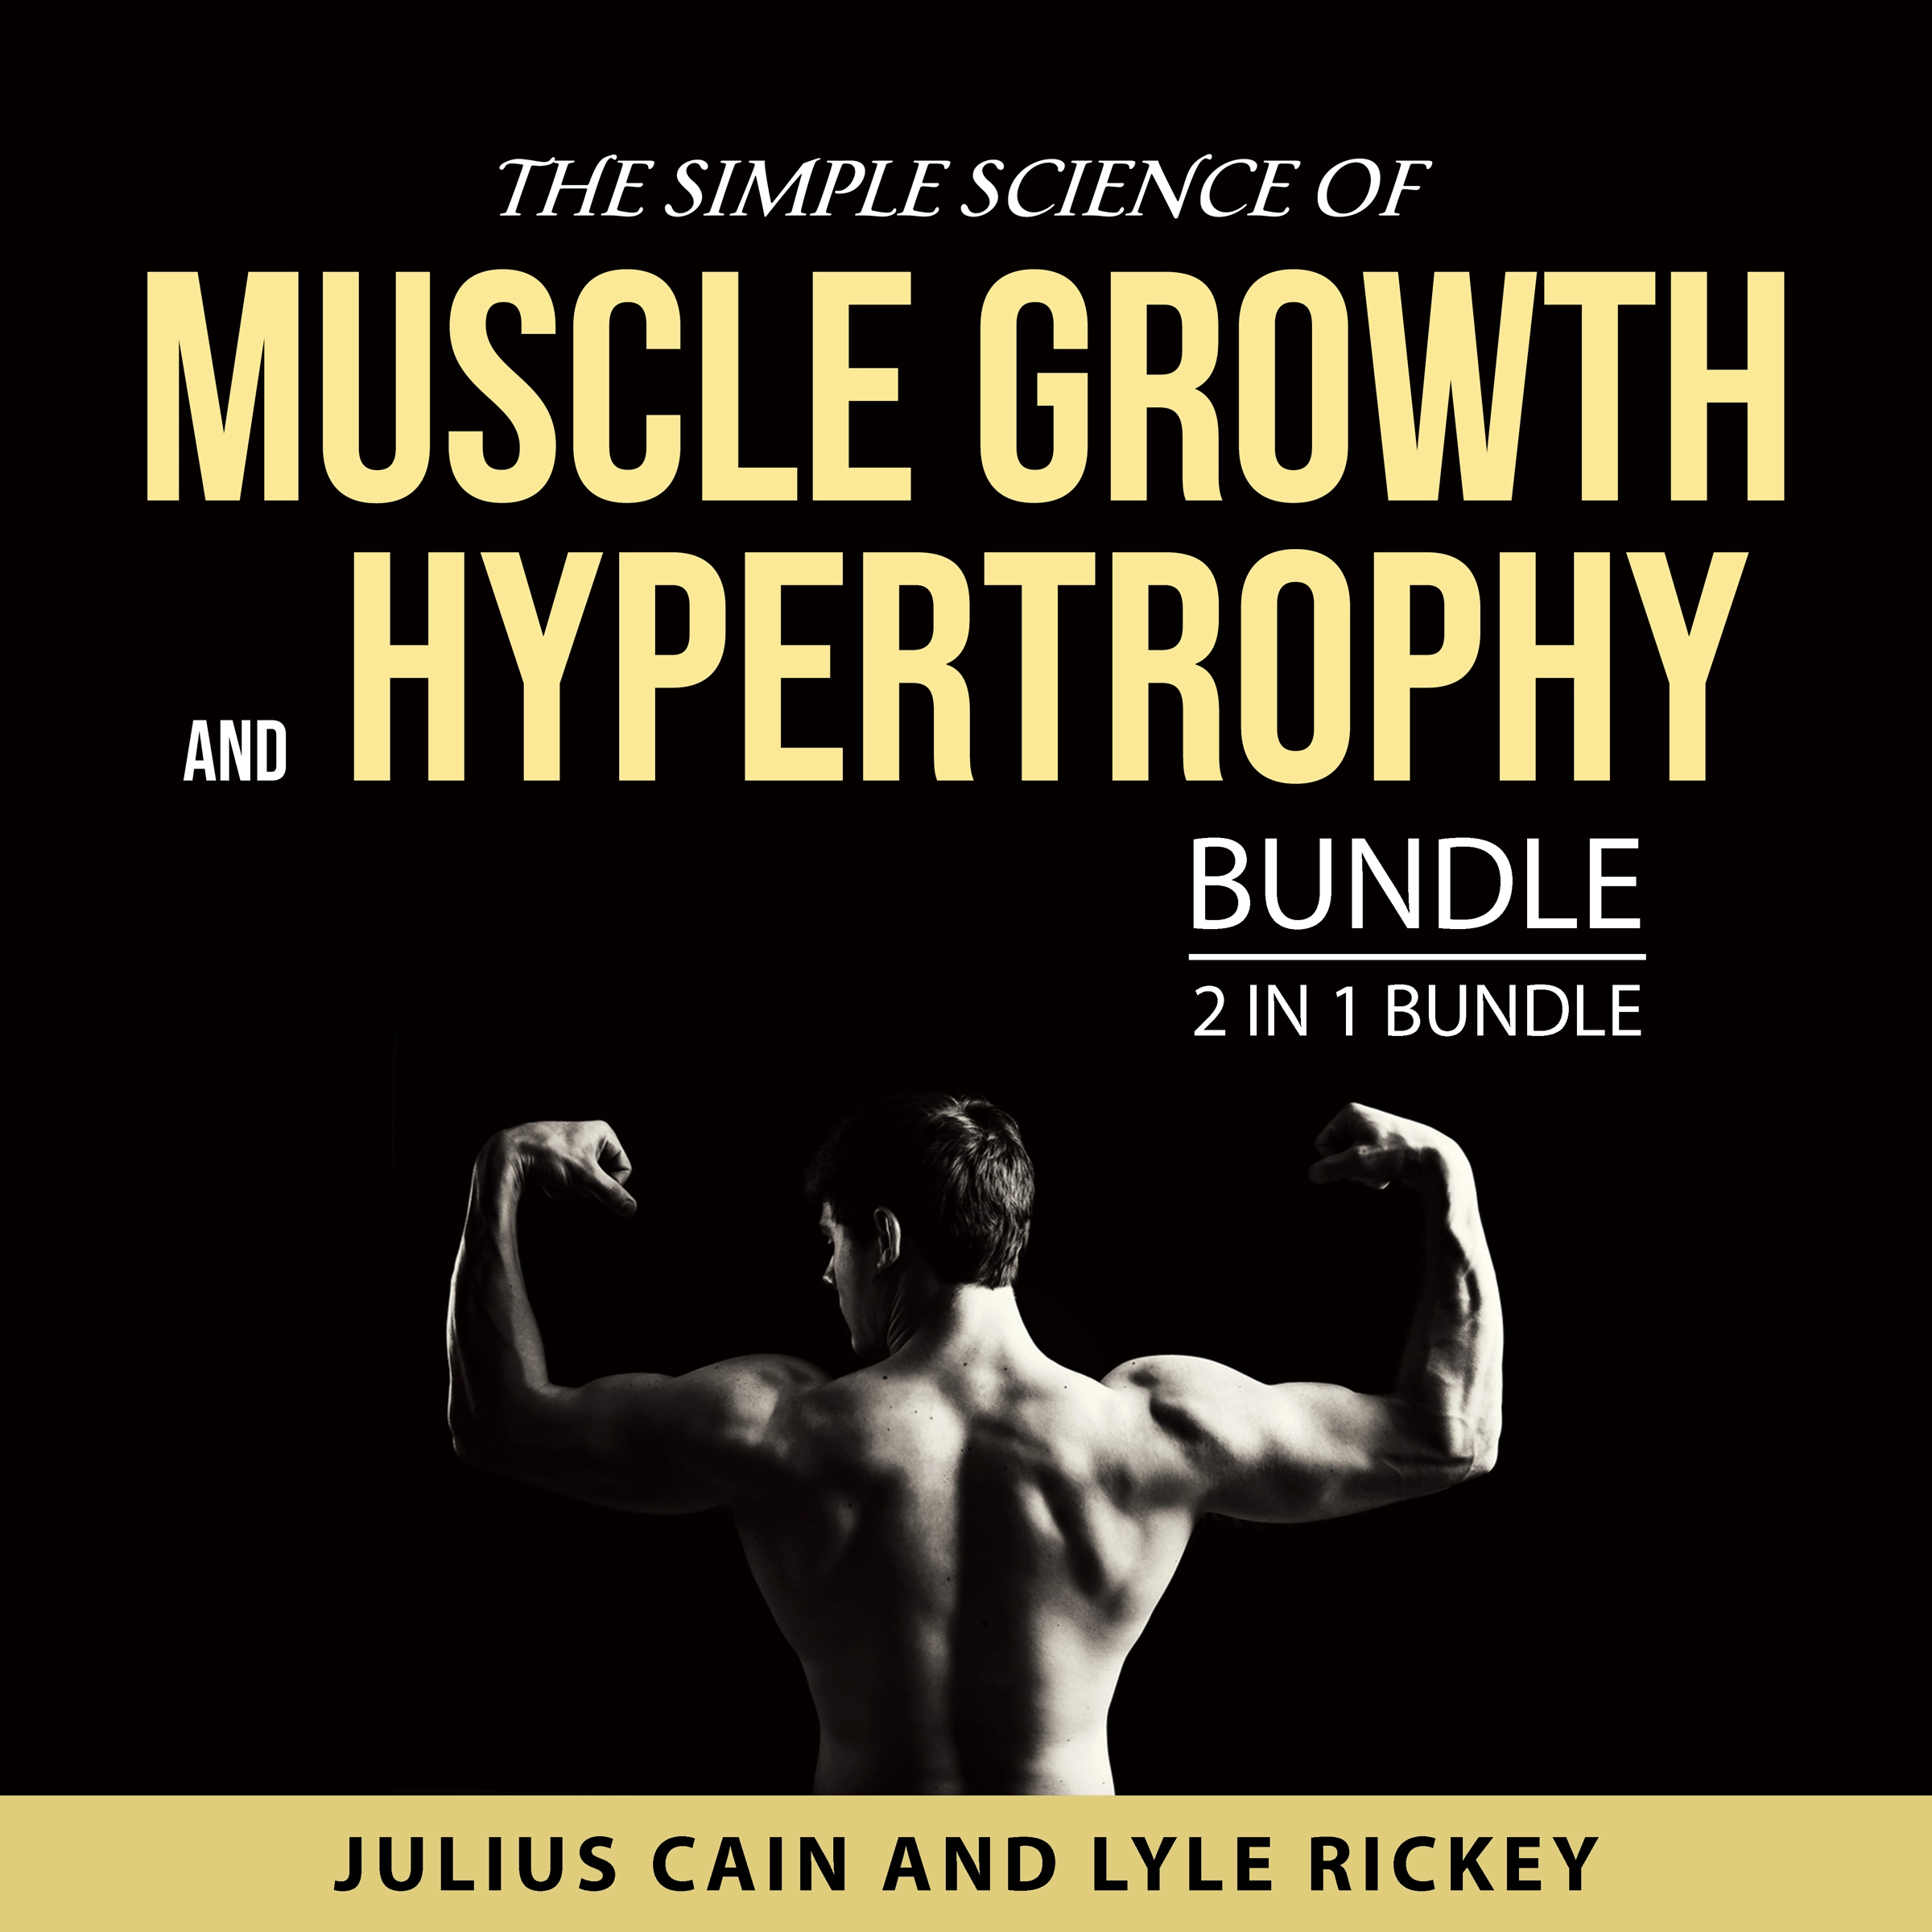 The Simple Science of Muscle Growth and Hypertrophy Bundle, 2 in 1 Bundle by Lyle Rickey Audiobook